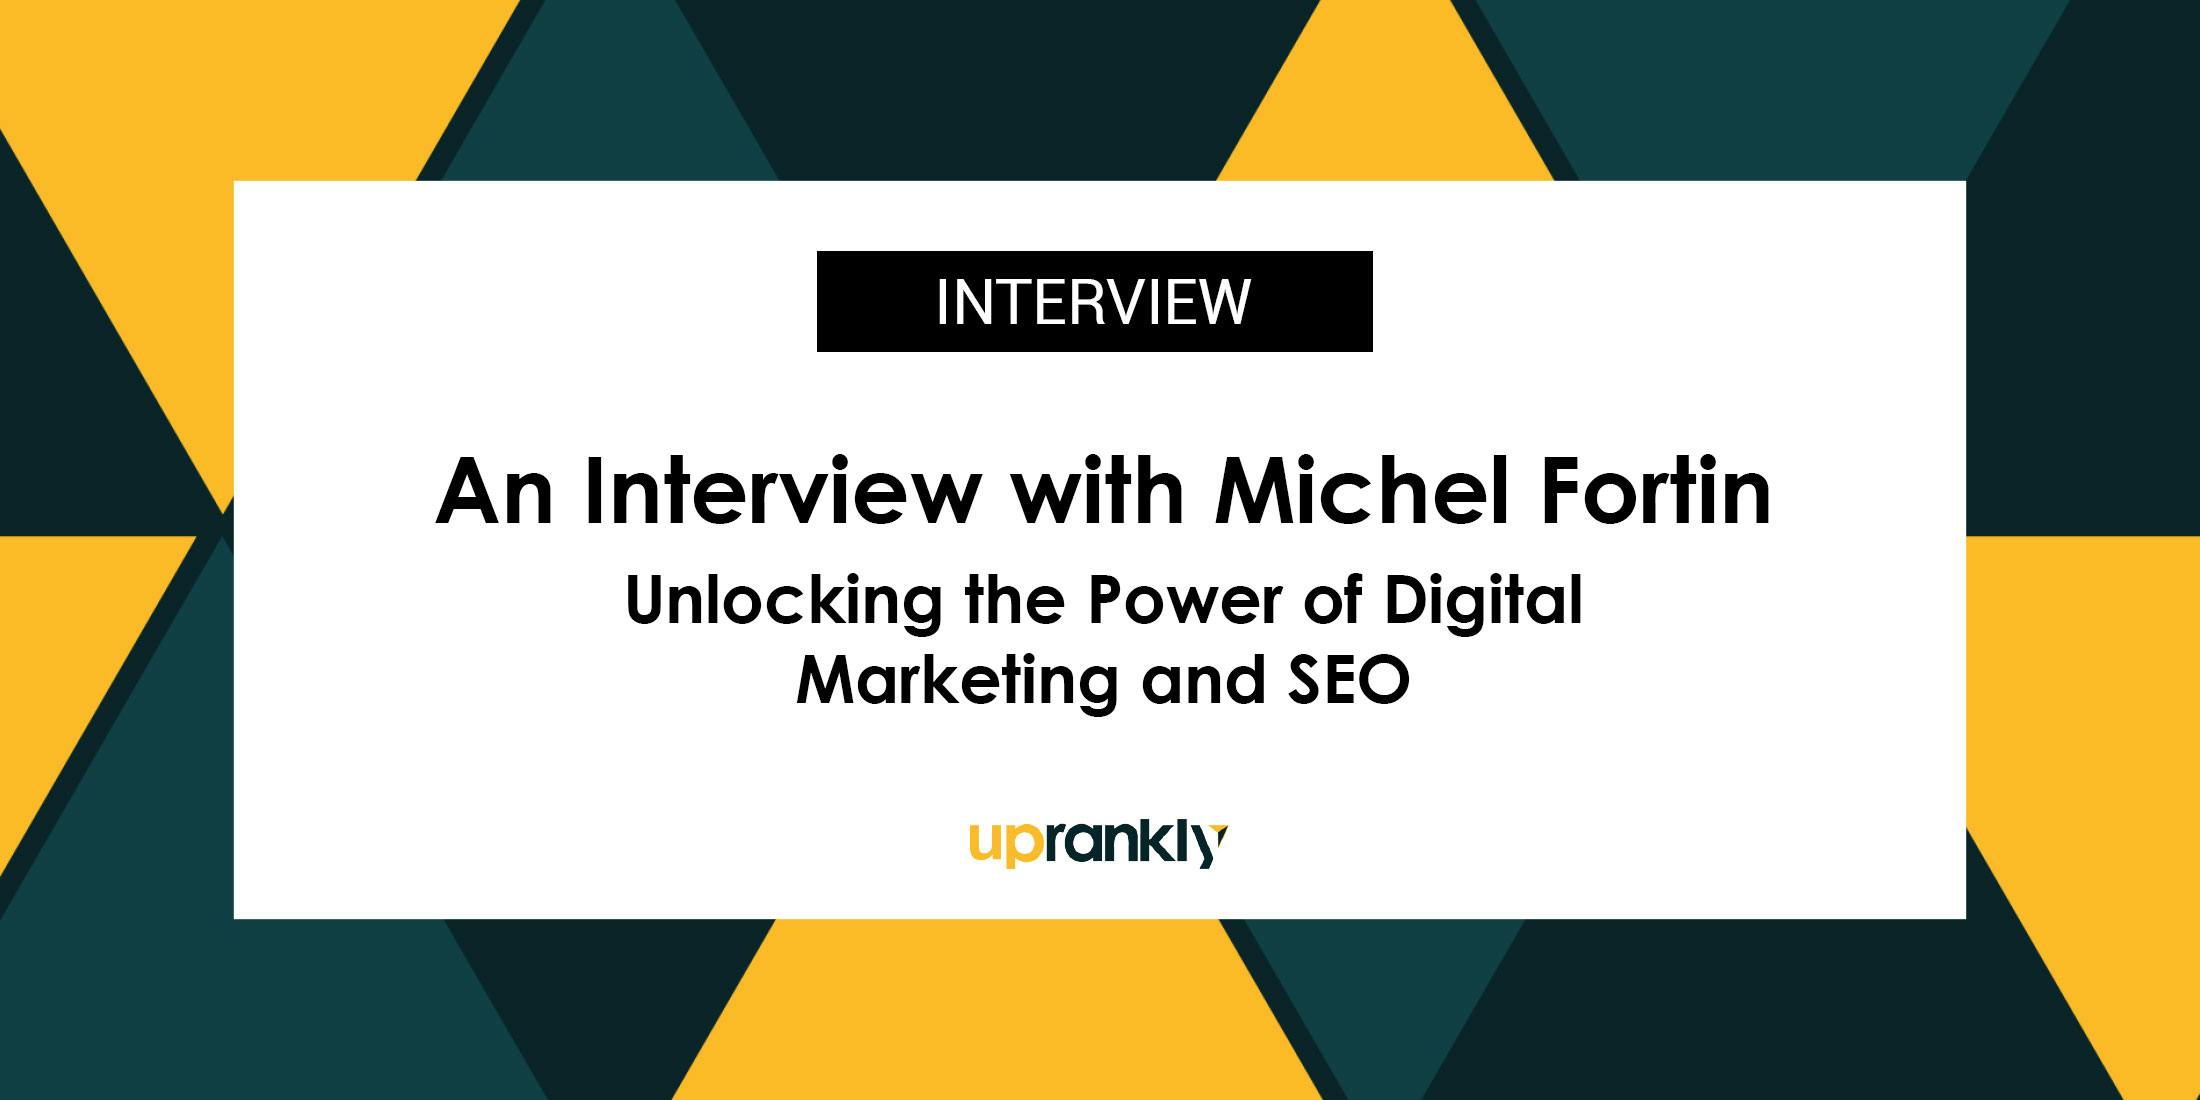 Unlocking the Power of Digital Marketing and SEO: Insights from Michel Fortin